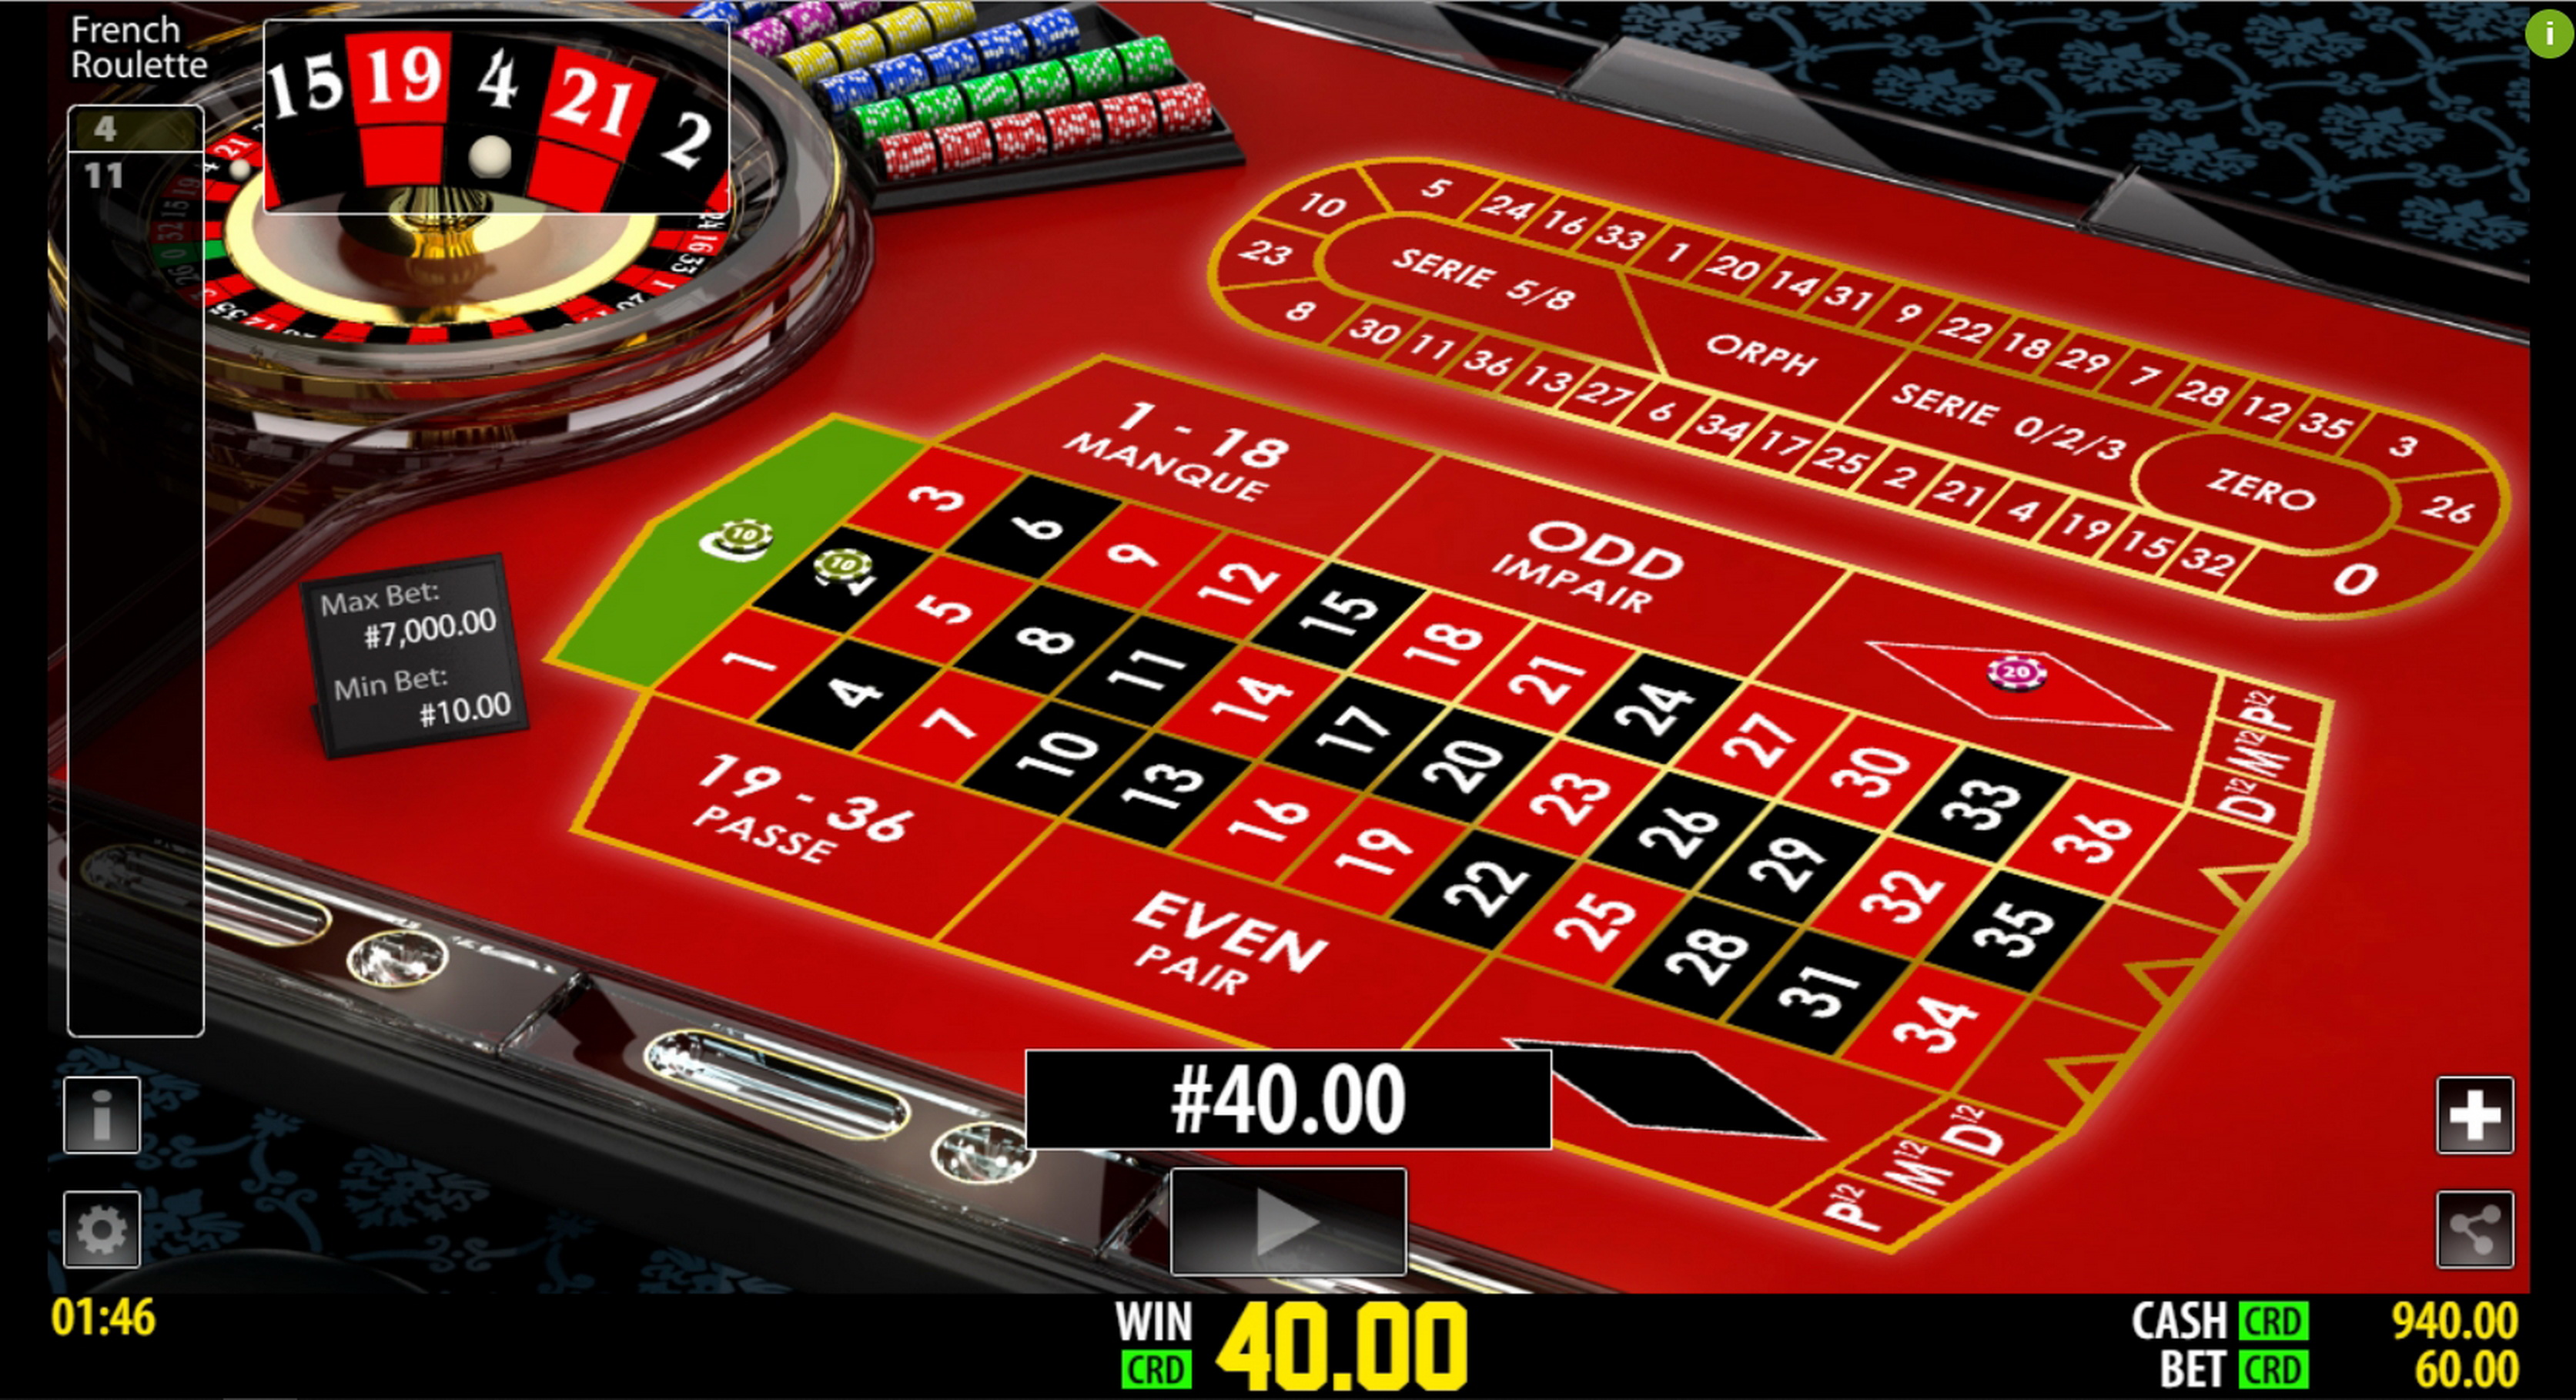 Win Money in French Roulette Privee Free Slot Game by World Match